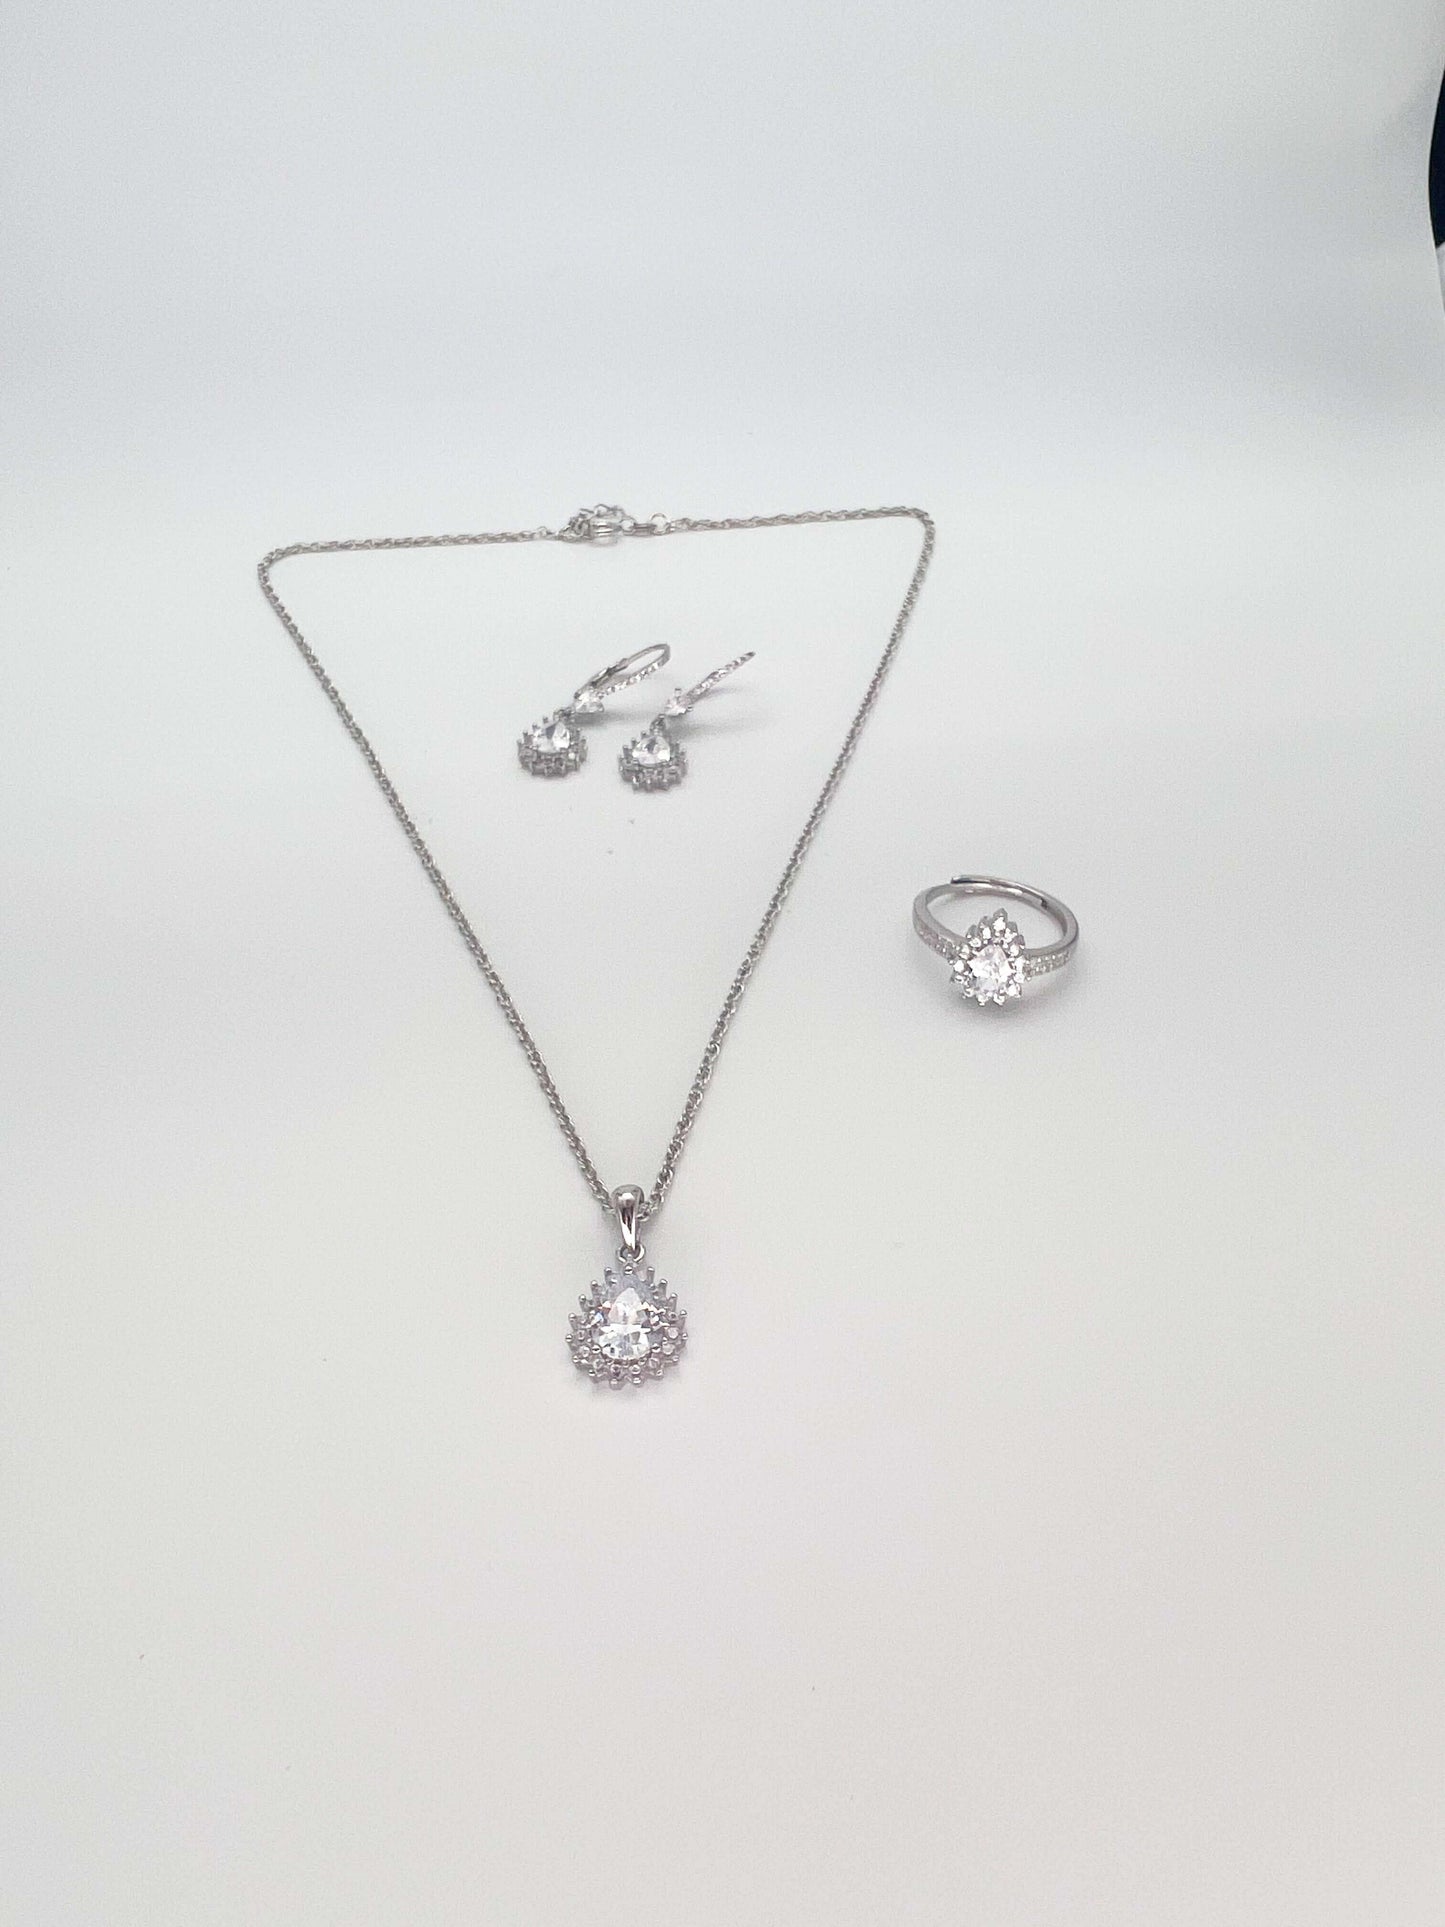 Alaya necklace set in silver with pear cut mossainite